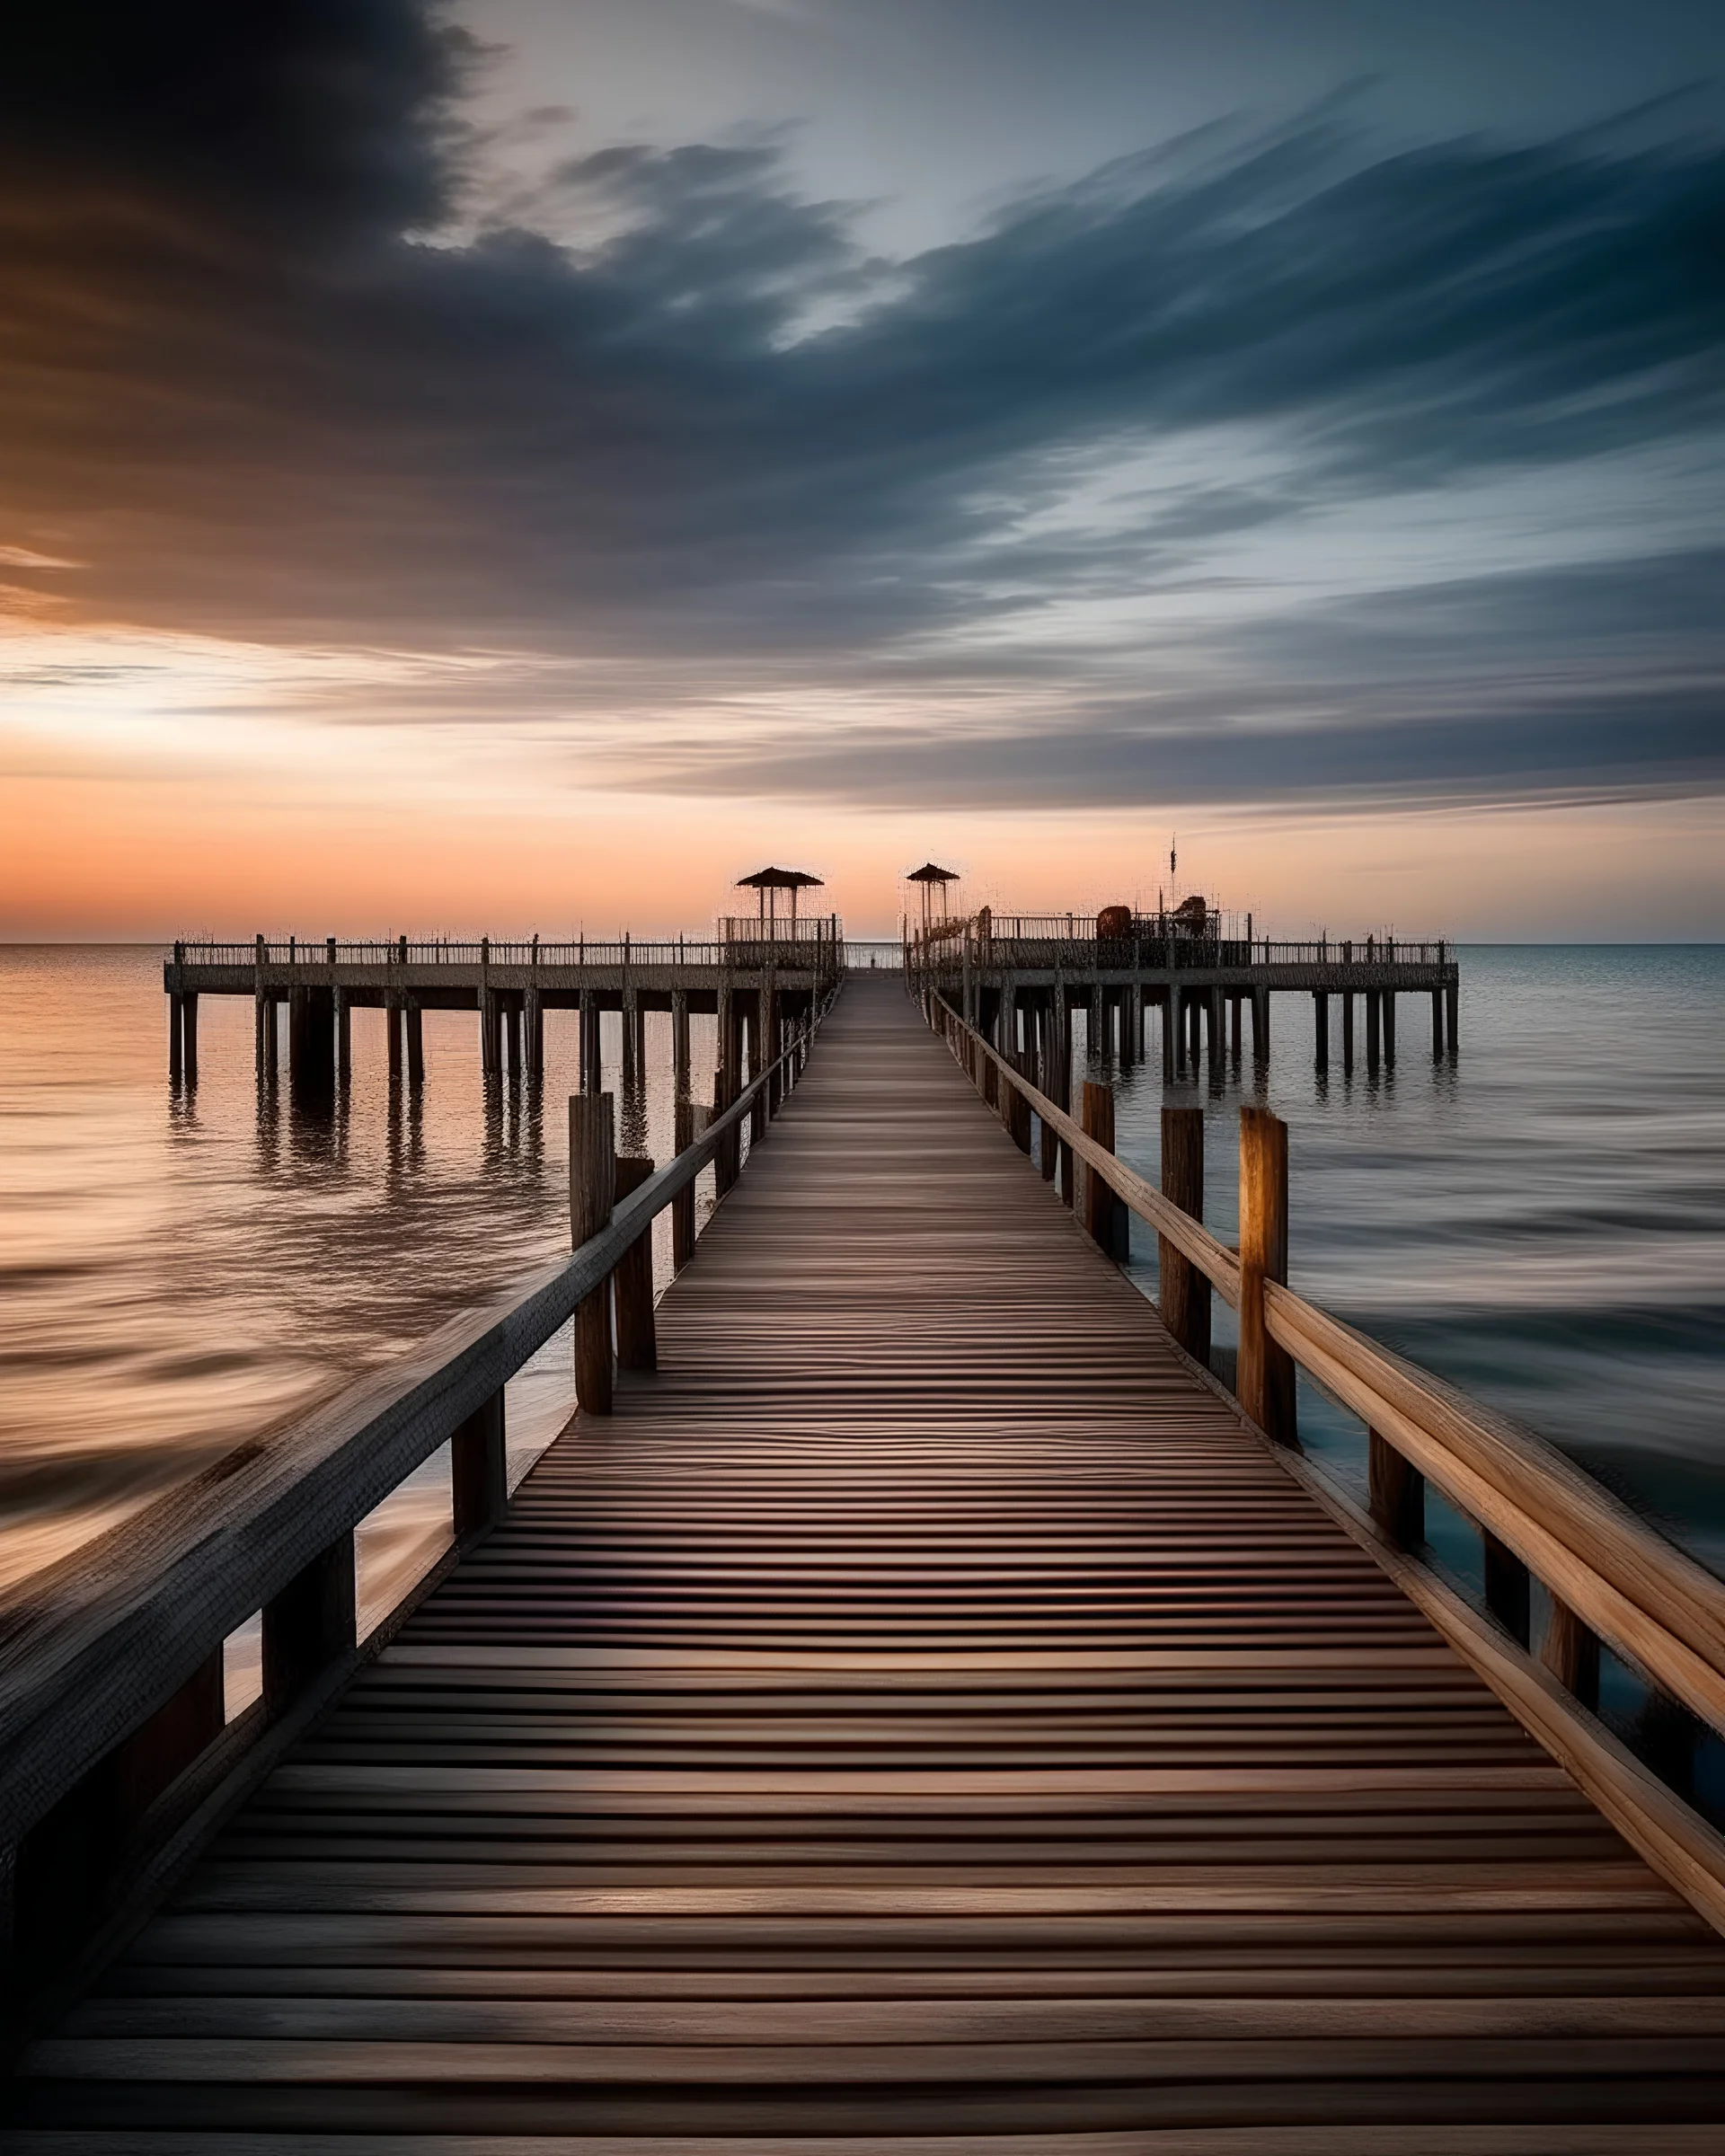 amazing long exposure sea sunset at the wooden jetty